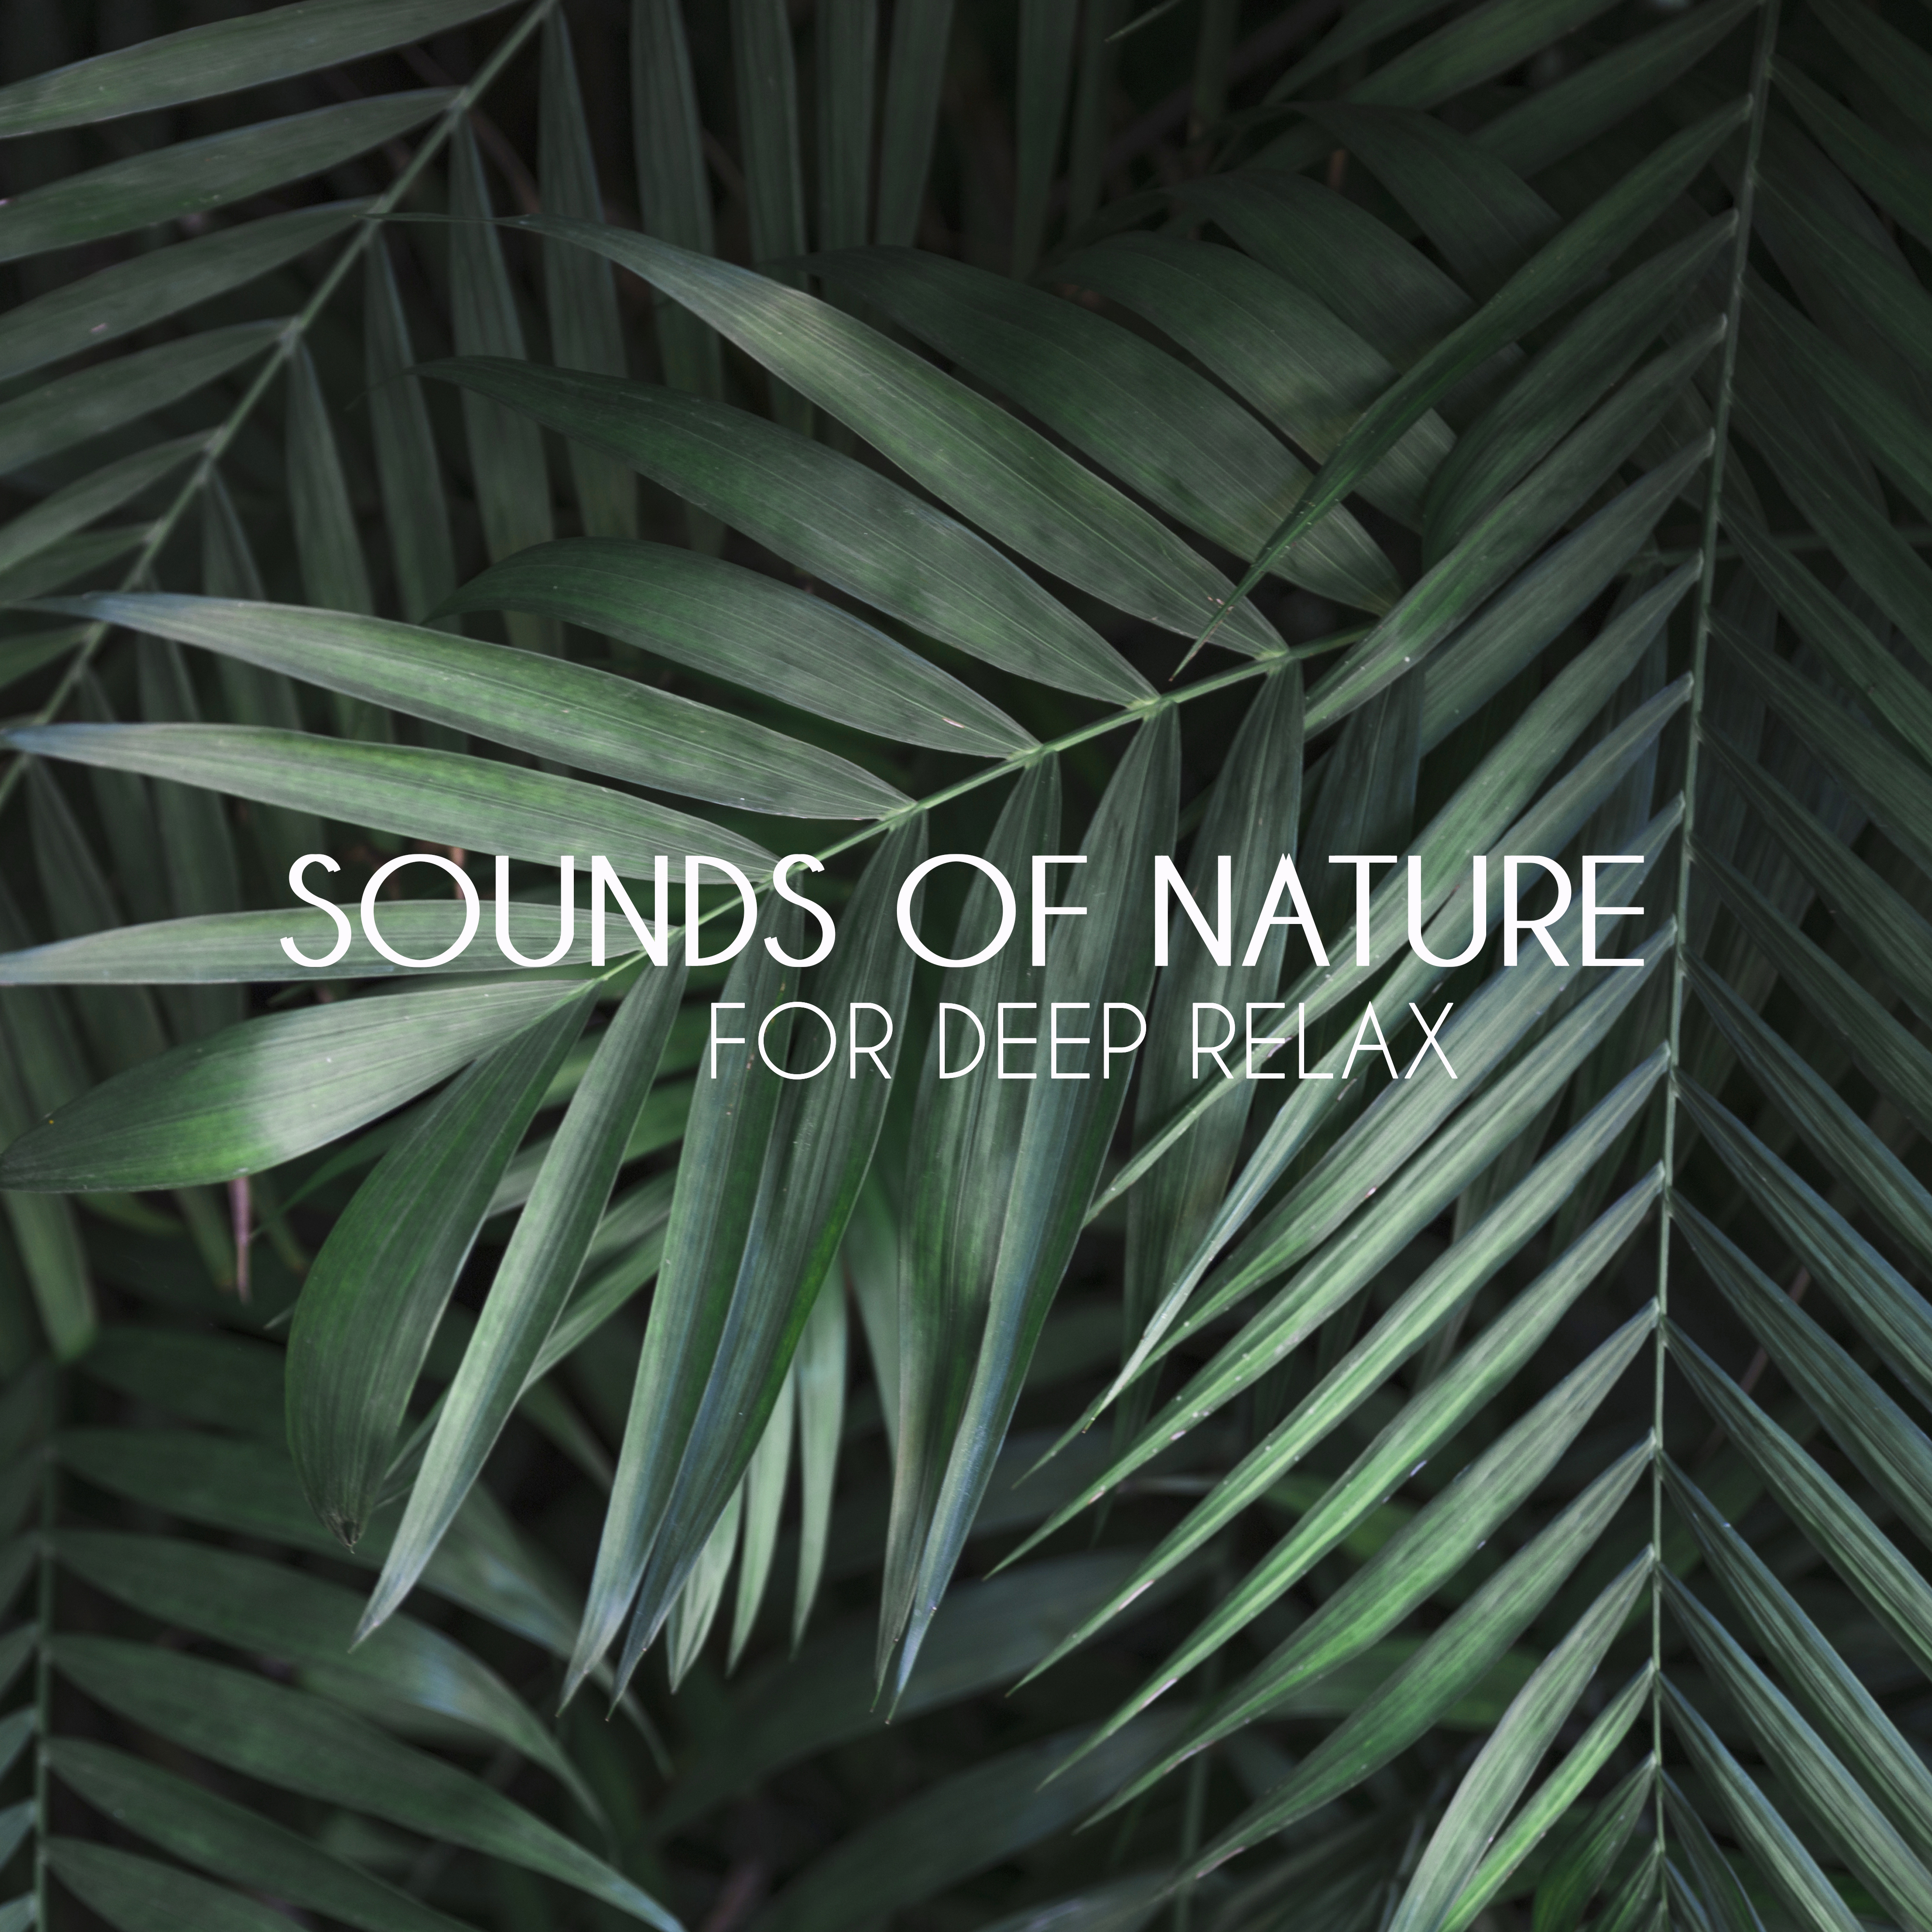 Sounds of Nature for Deep Relax